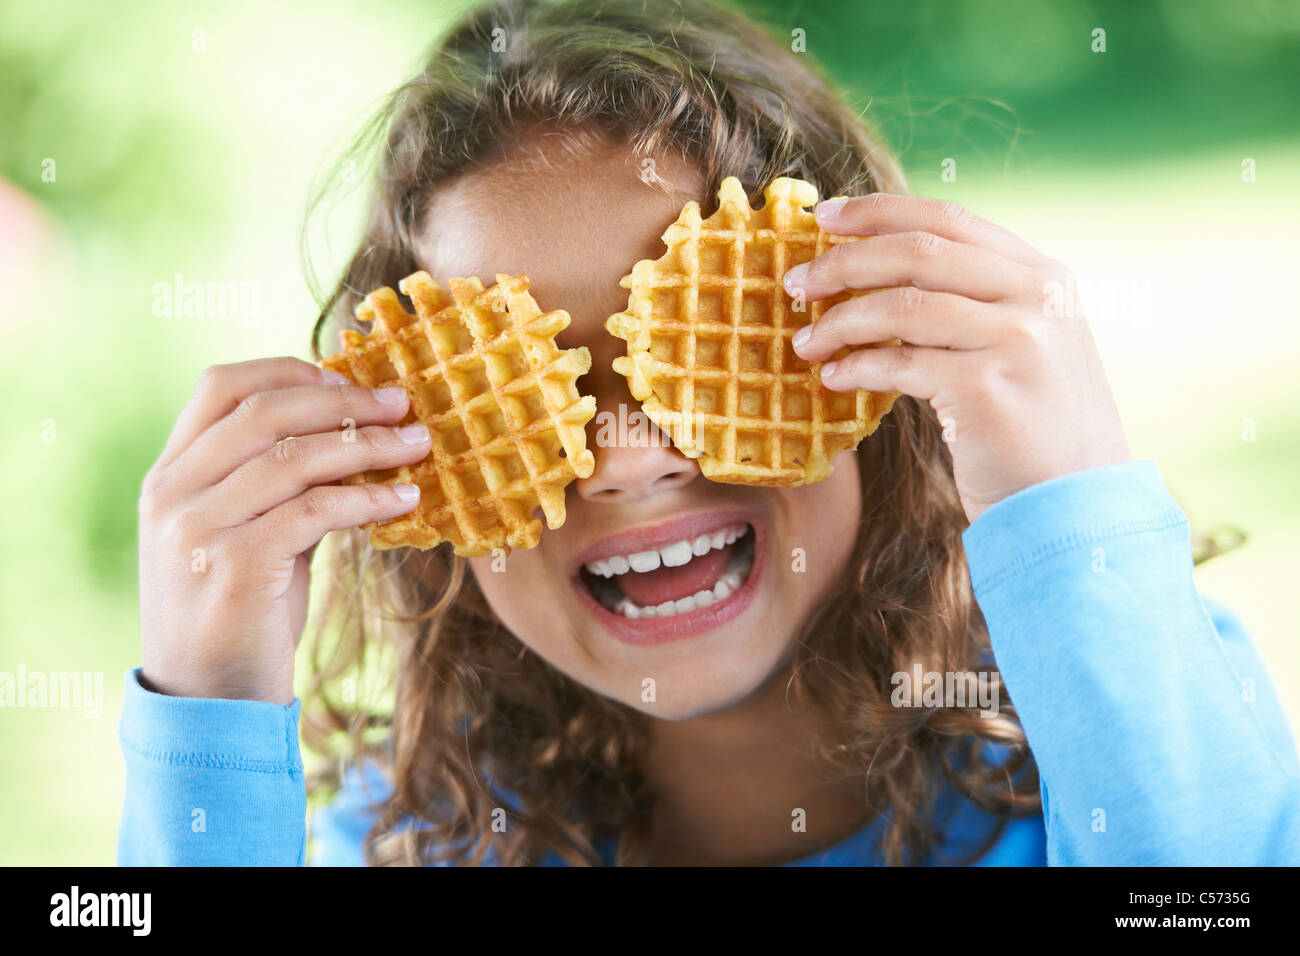 Smiling girl playing with waffles Stock Photo